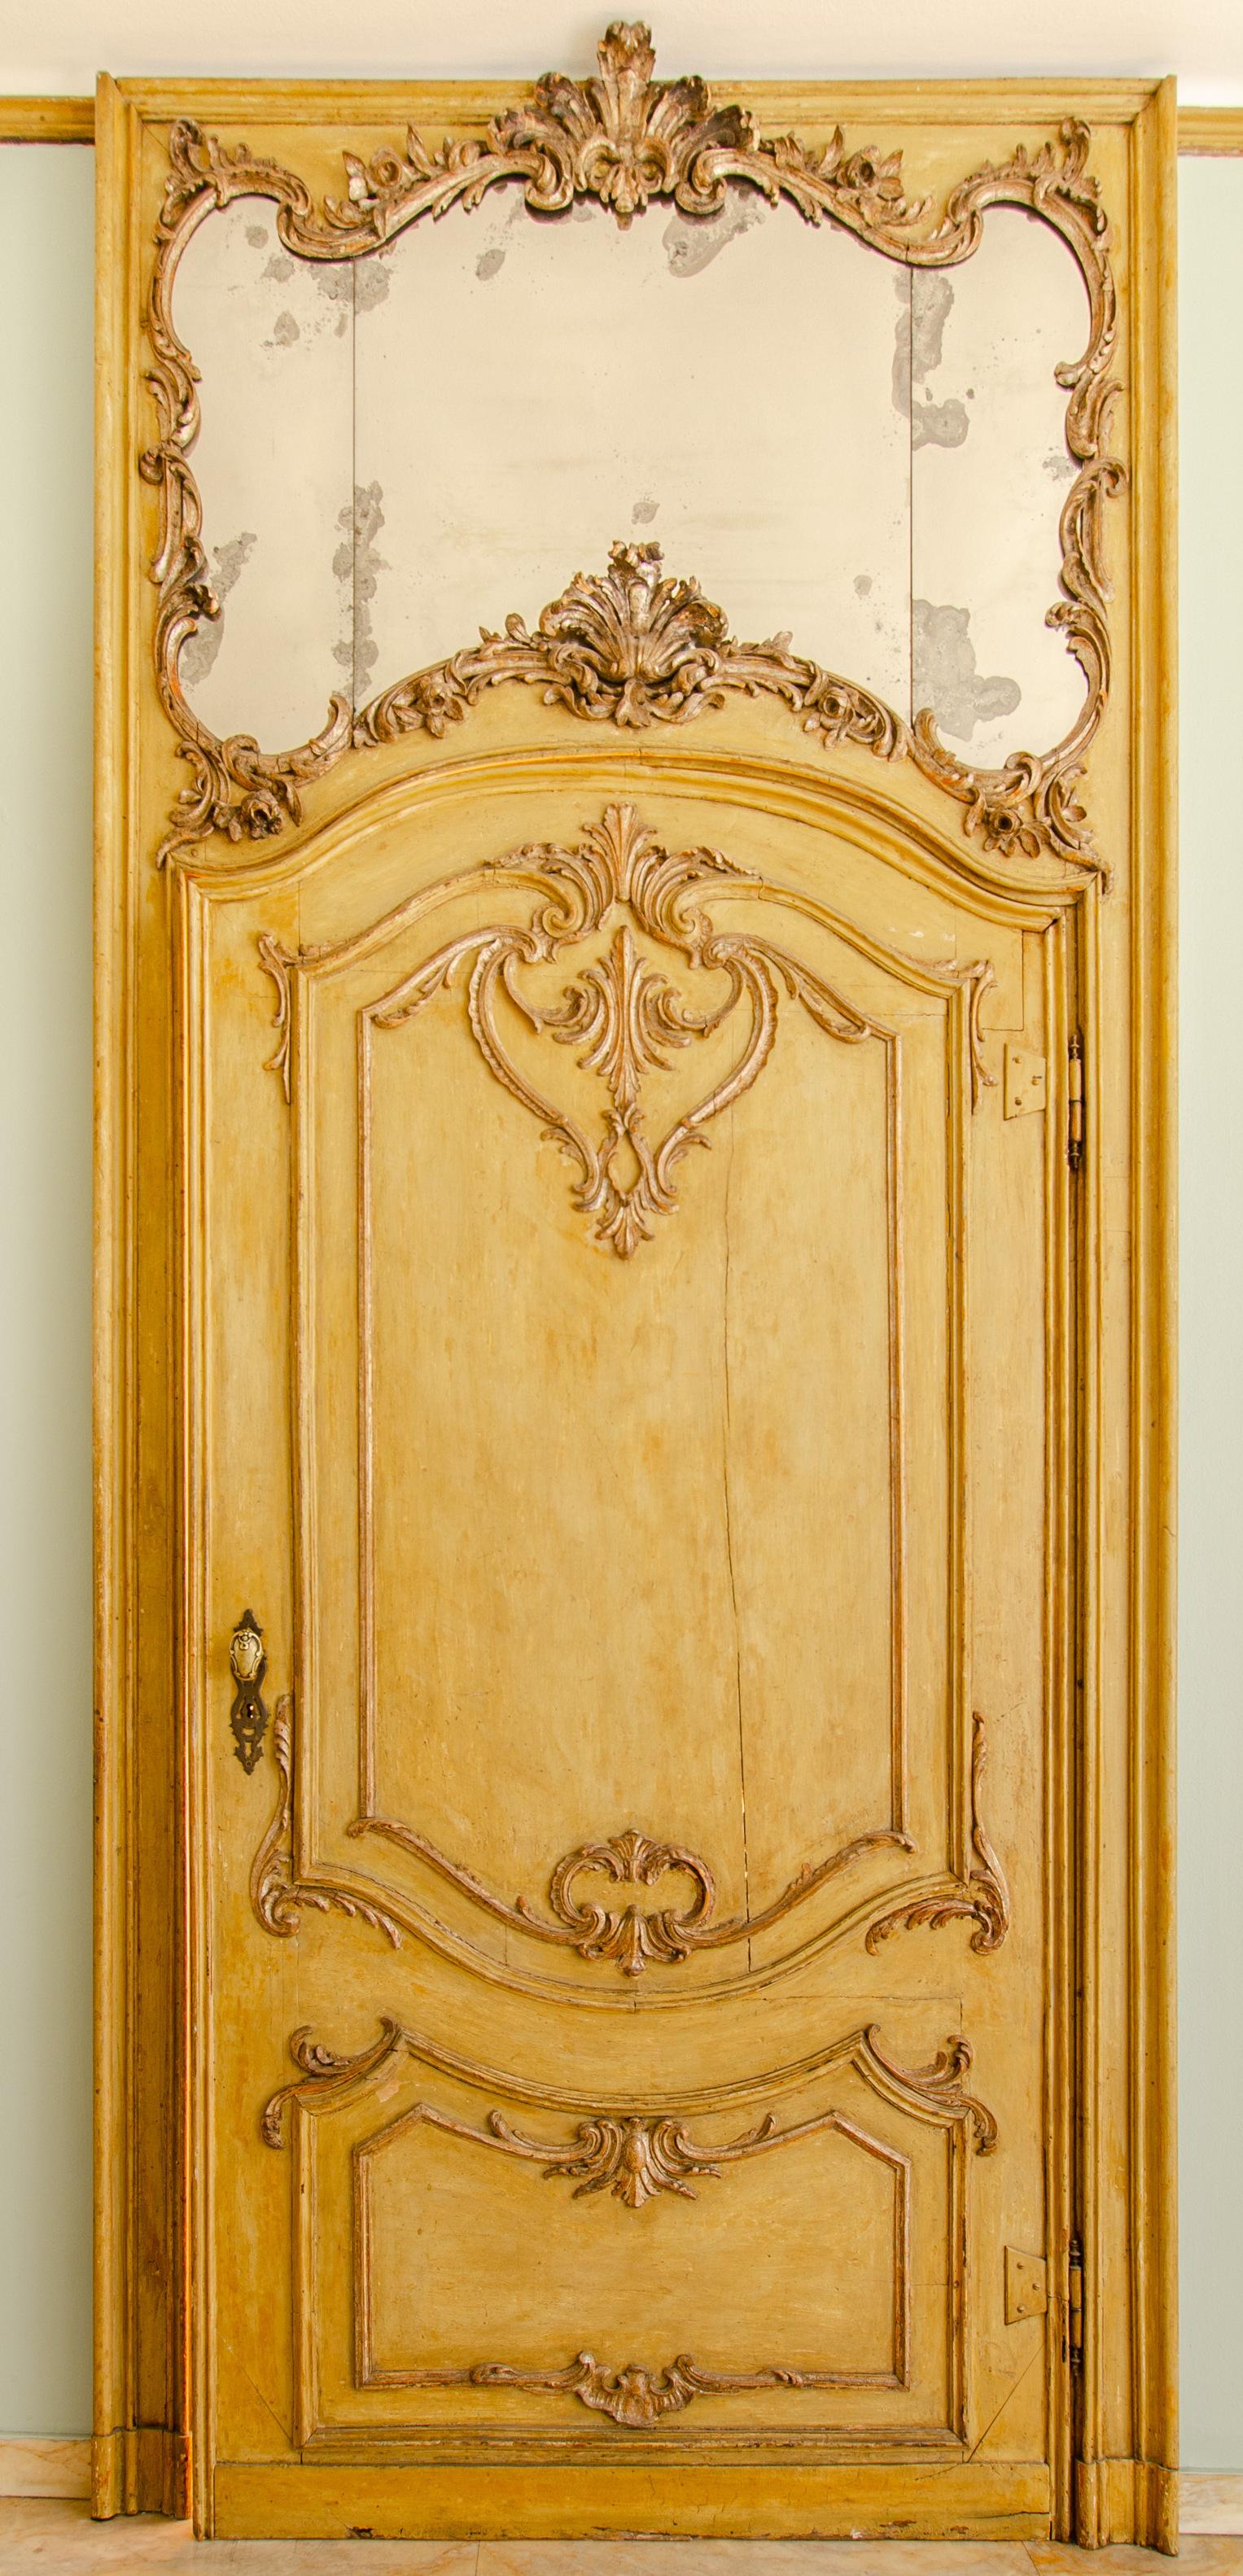 2 ancient original Baroque doors hand-lacquered yellow and gilded with leaf, an important door with a chopped mirror, built at the beginning of the 18th century by an Italian artist, come from a large villa in Milan. They will surely give luxury and